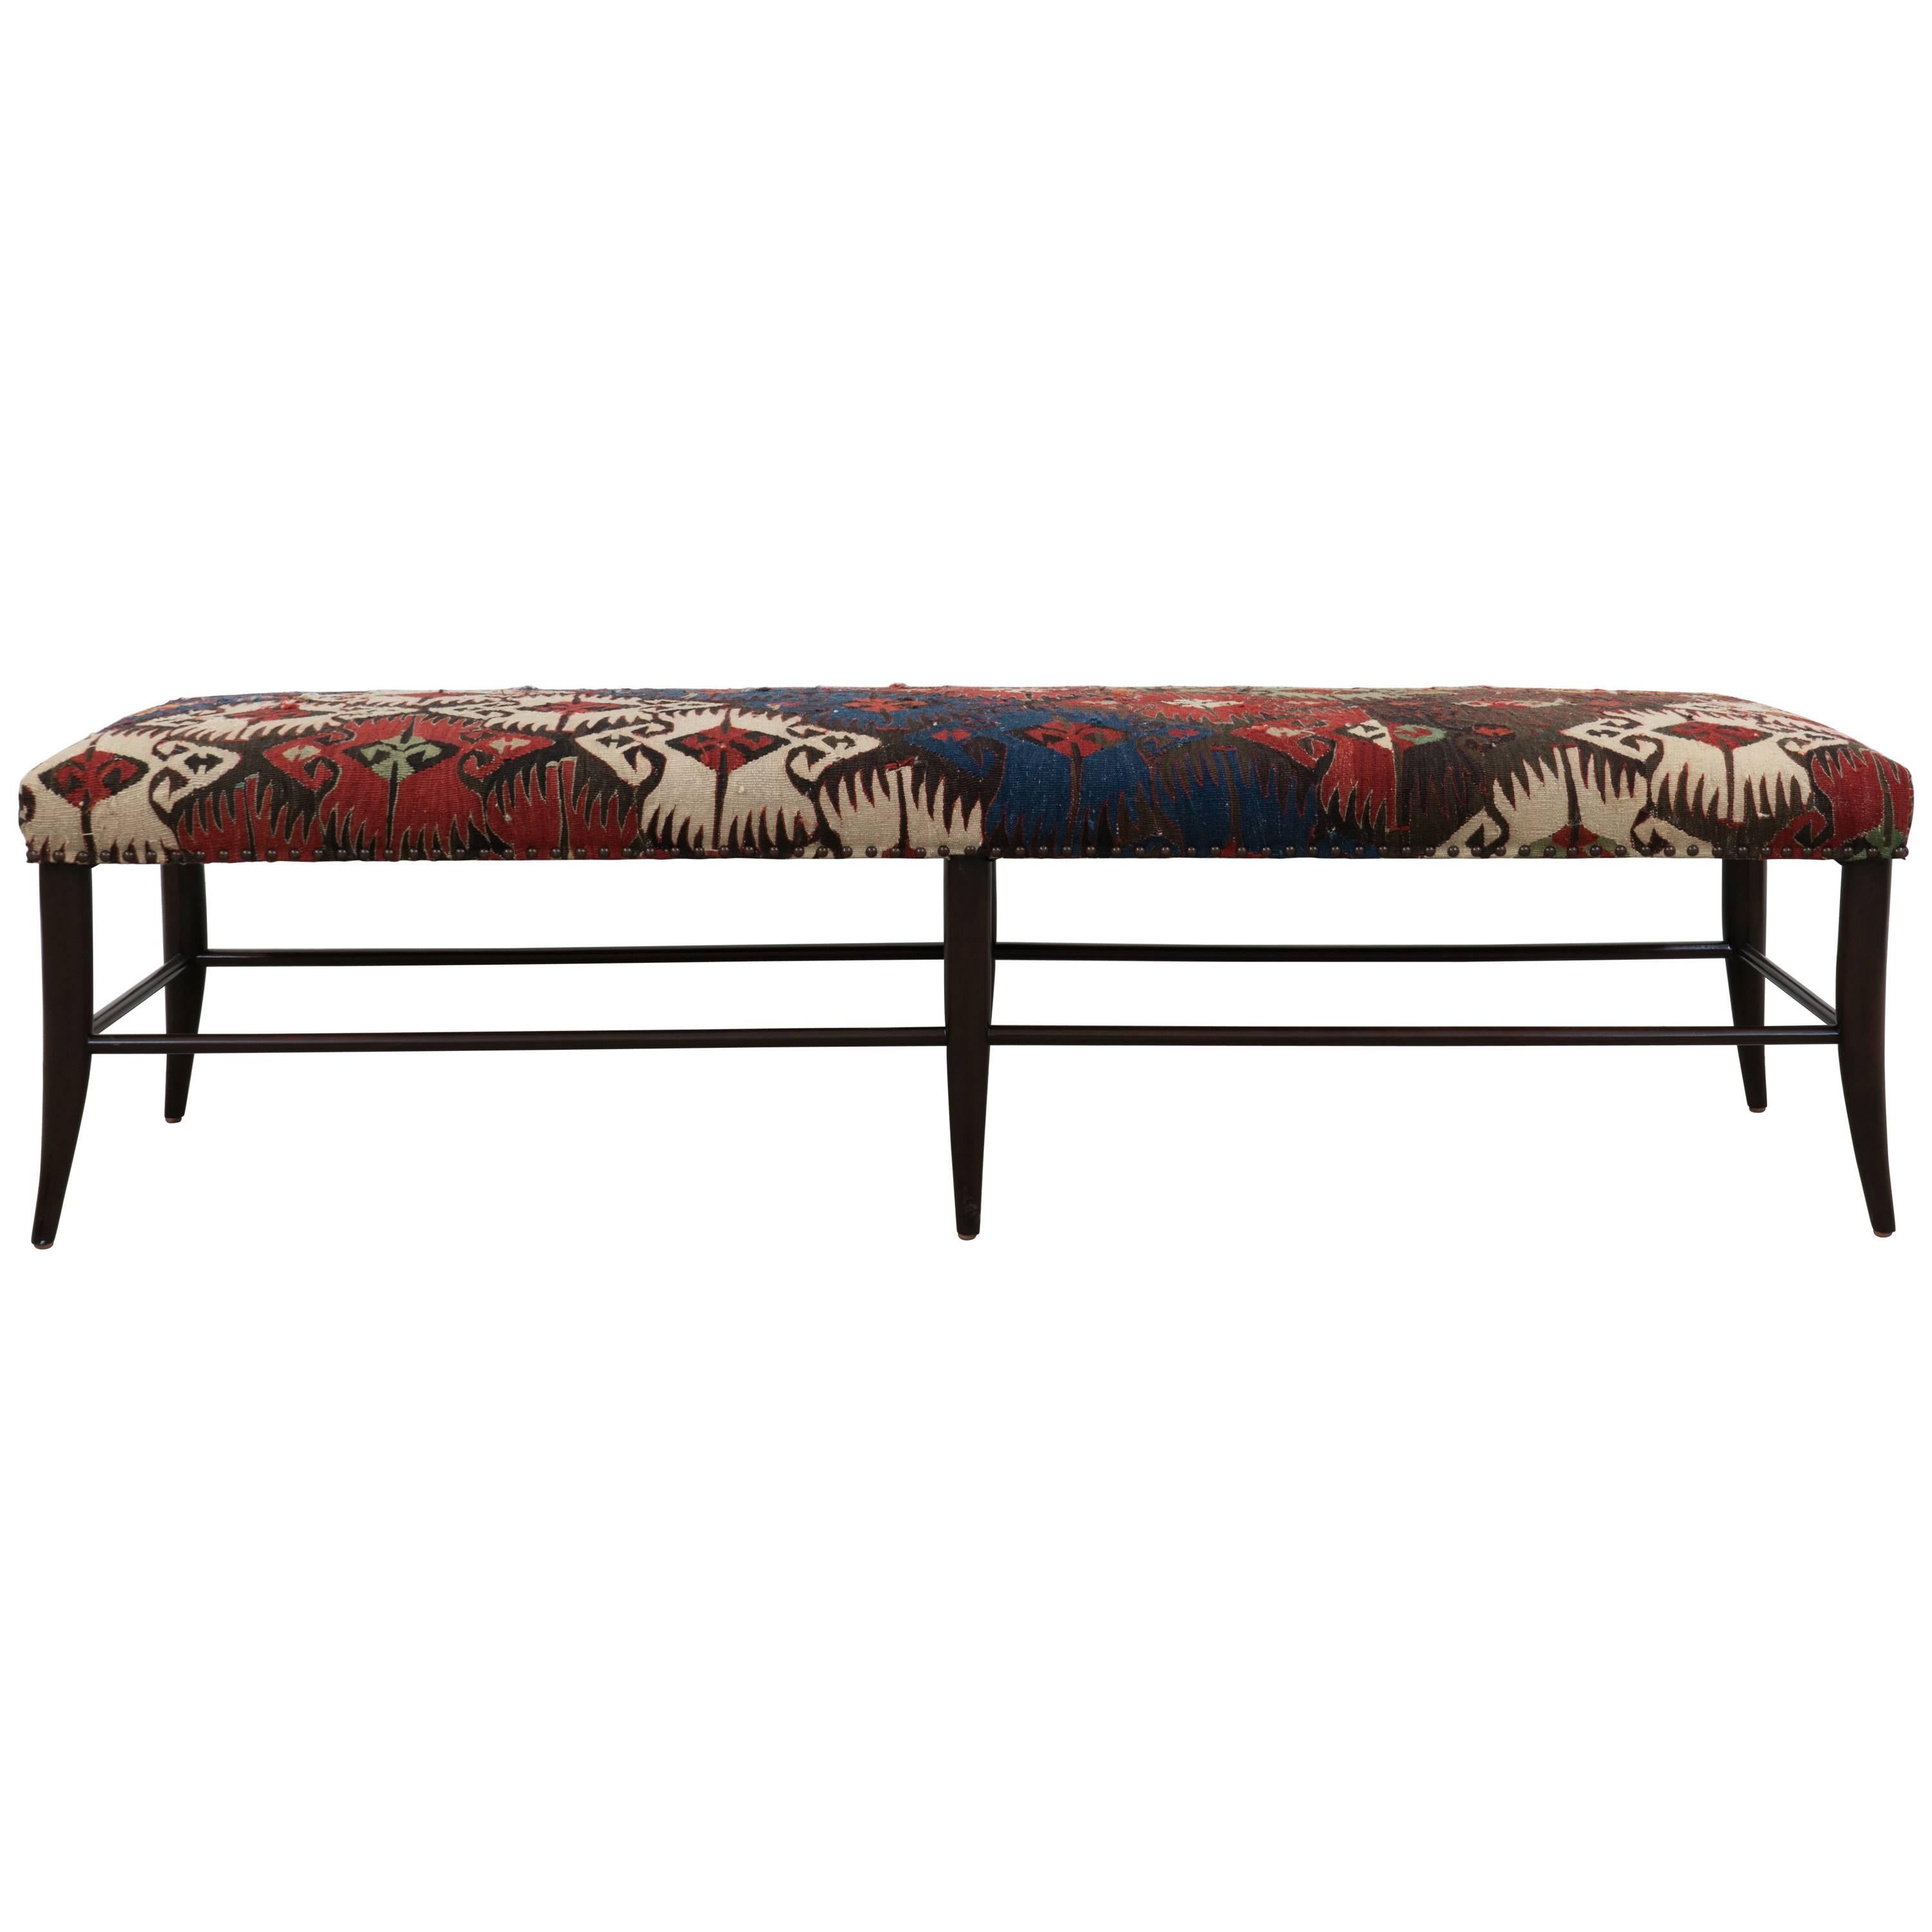 Bench with Vintage Rug Upholstery